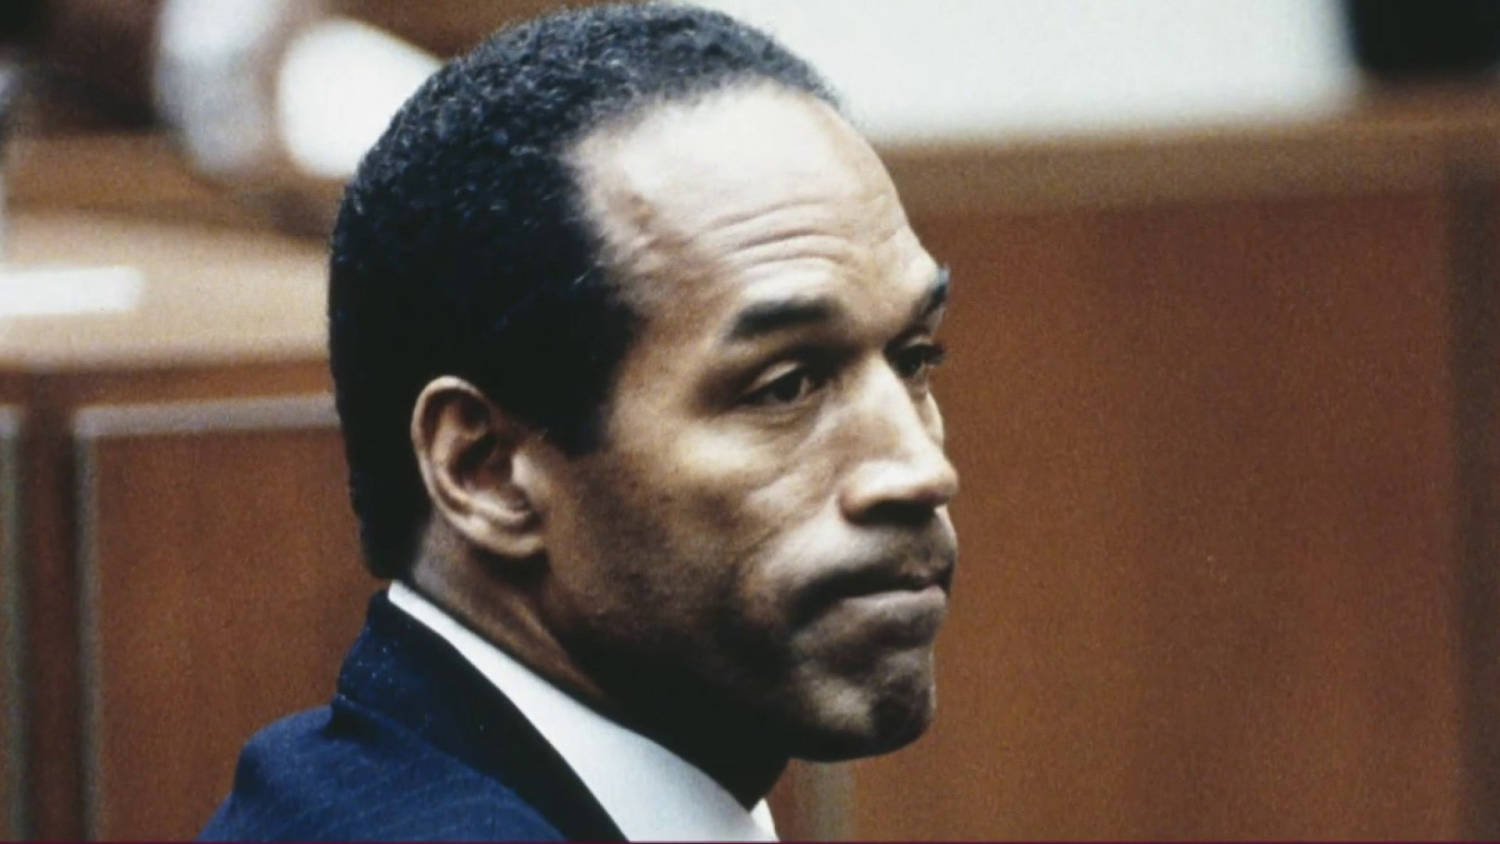 How O.J. Simpson's murder trial altered the legal landscape